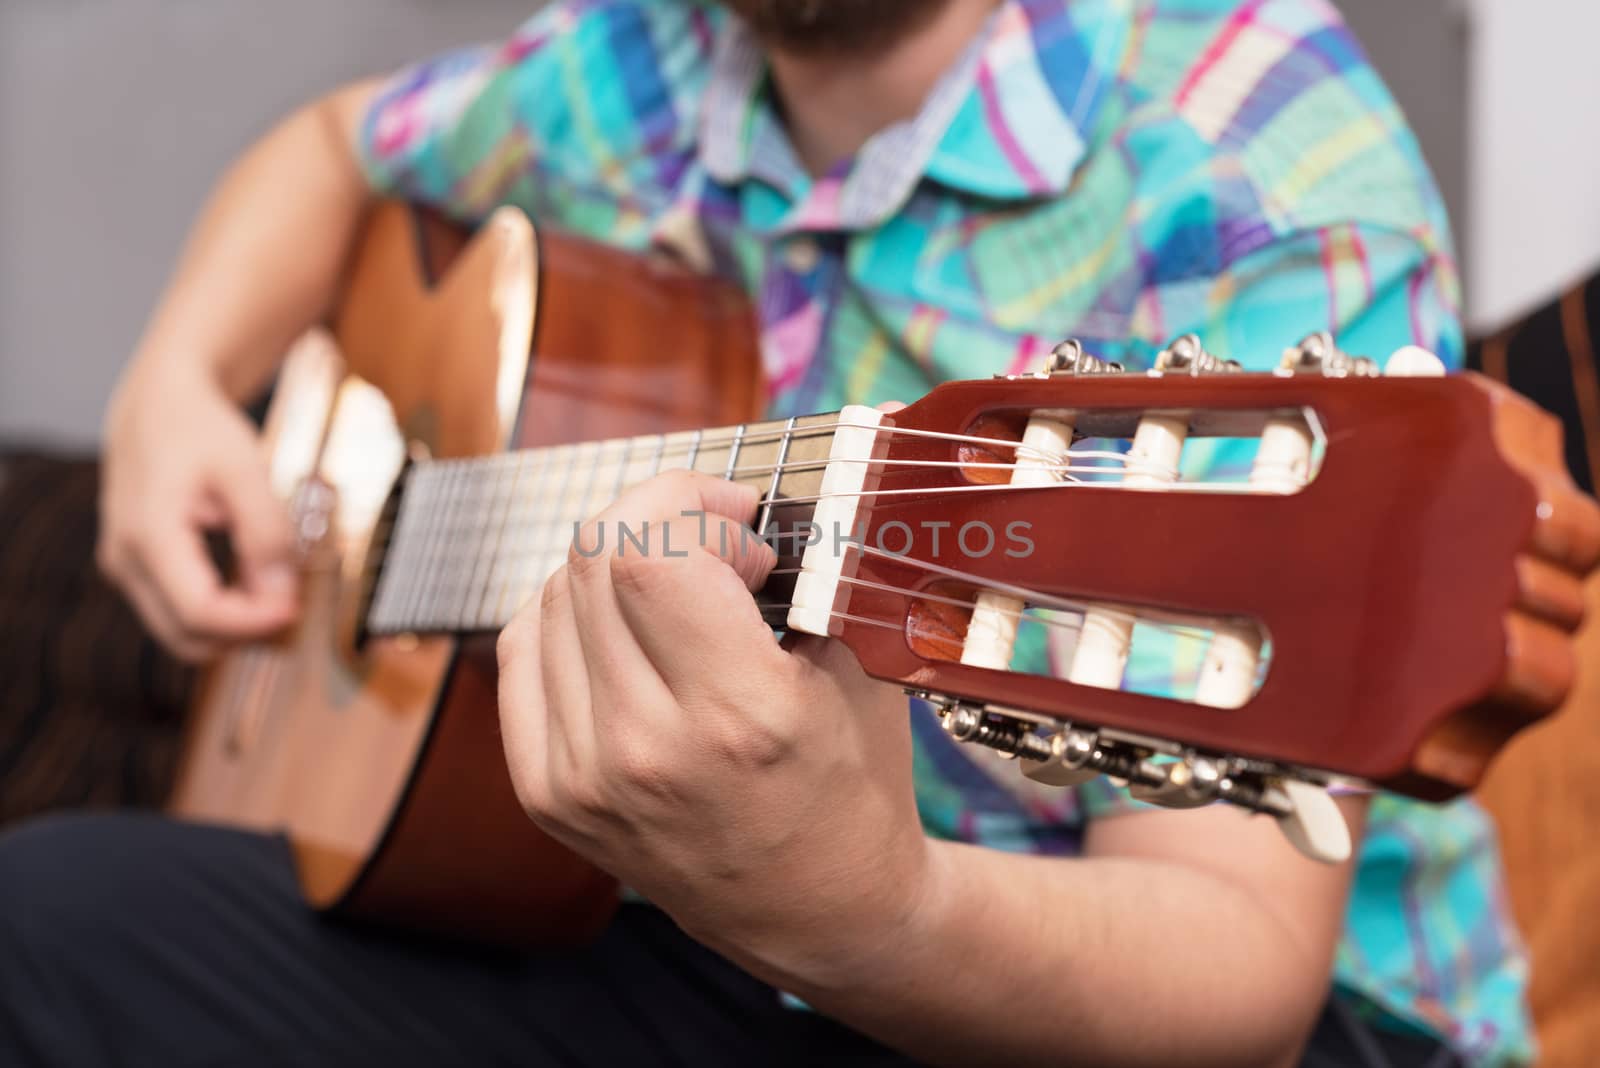 Bearded hipster man hand playing acoustic guitar. Close-up selective focus on hand.